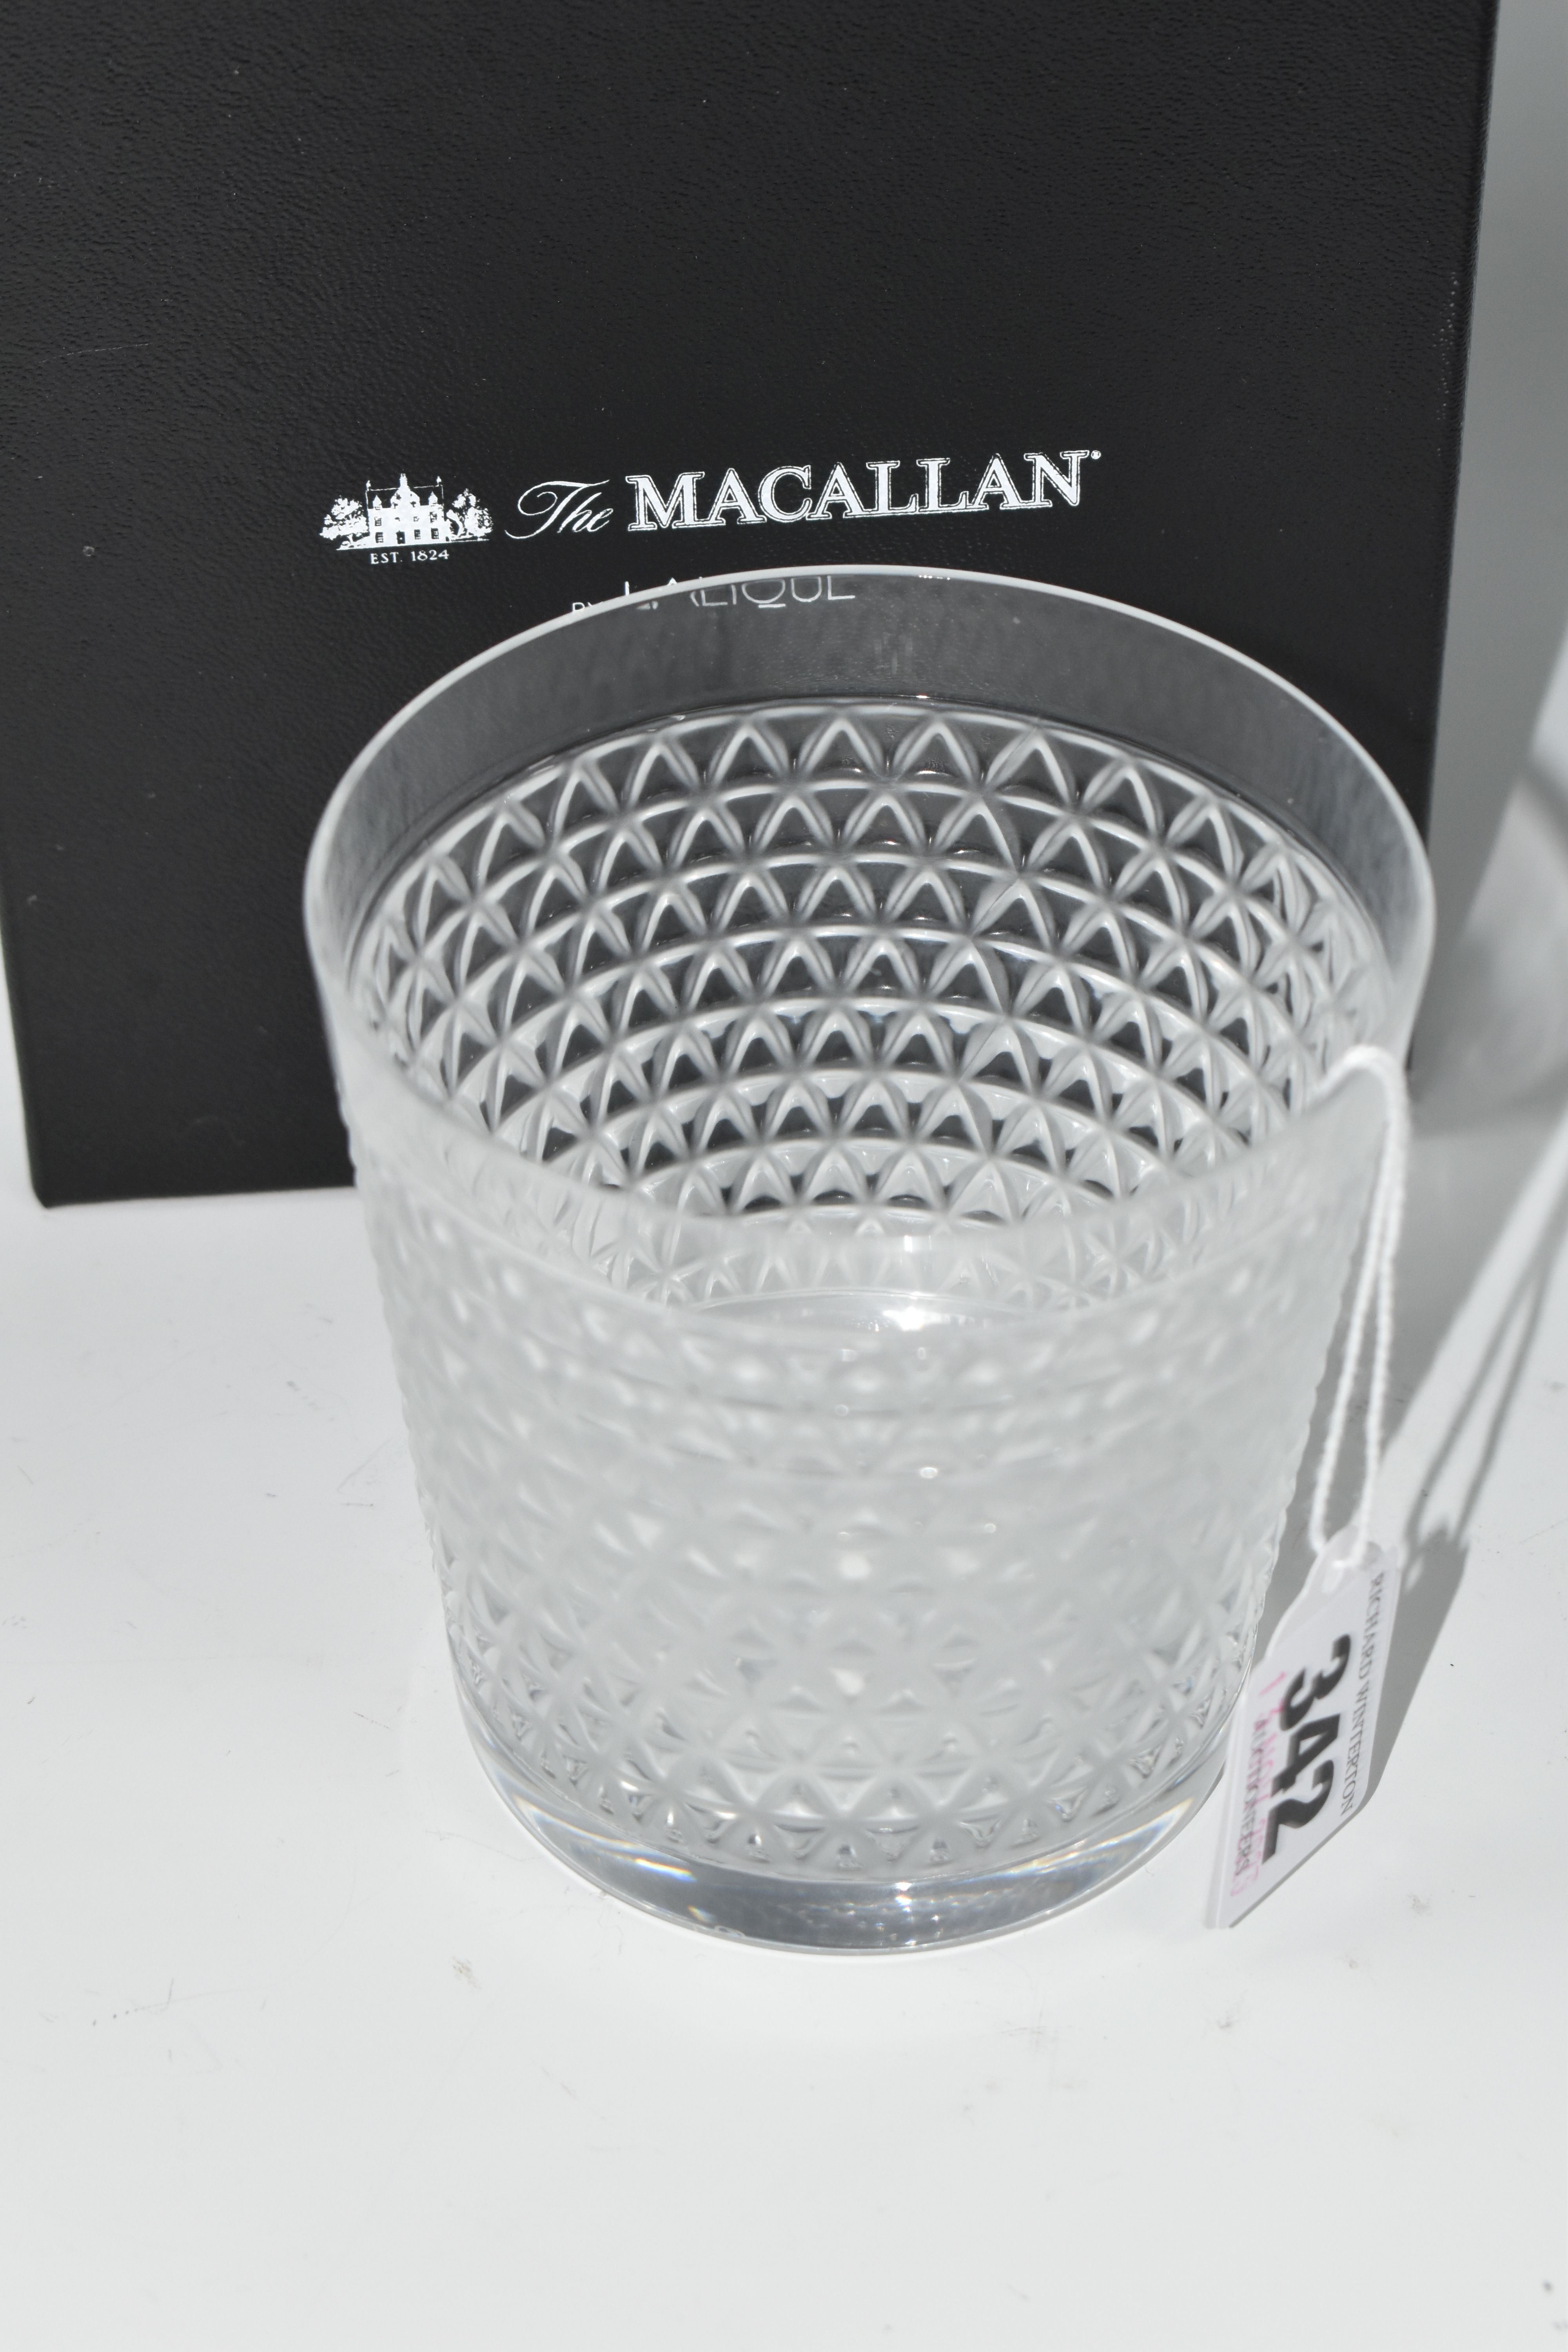 A BOXED LALIQUE 'THE MACALLAN' TUMBLER, having a textured design, signed 'Lalique France', the - Image 2 of 4